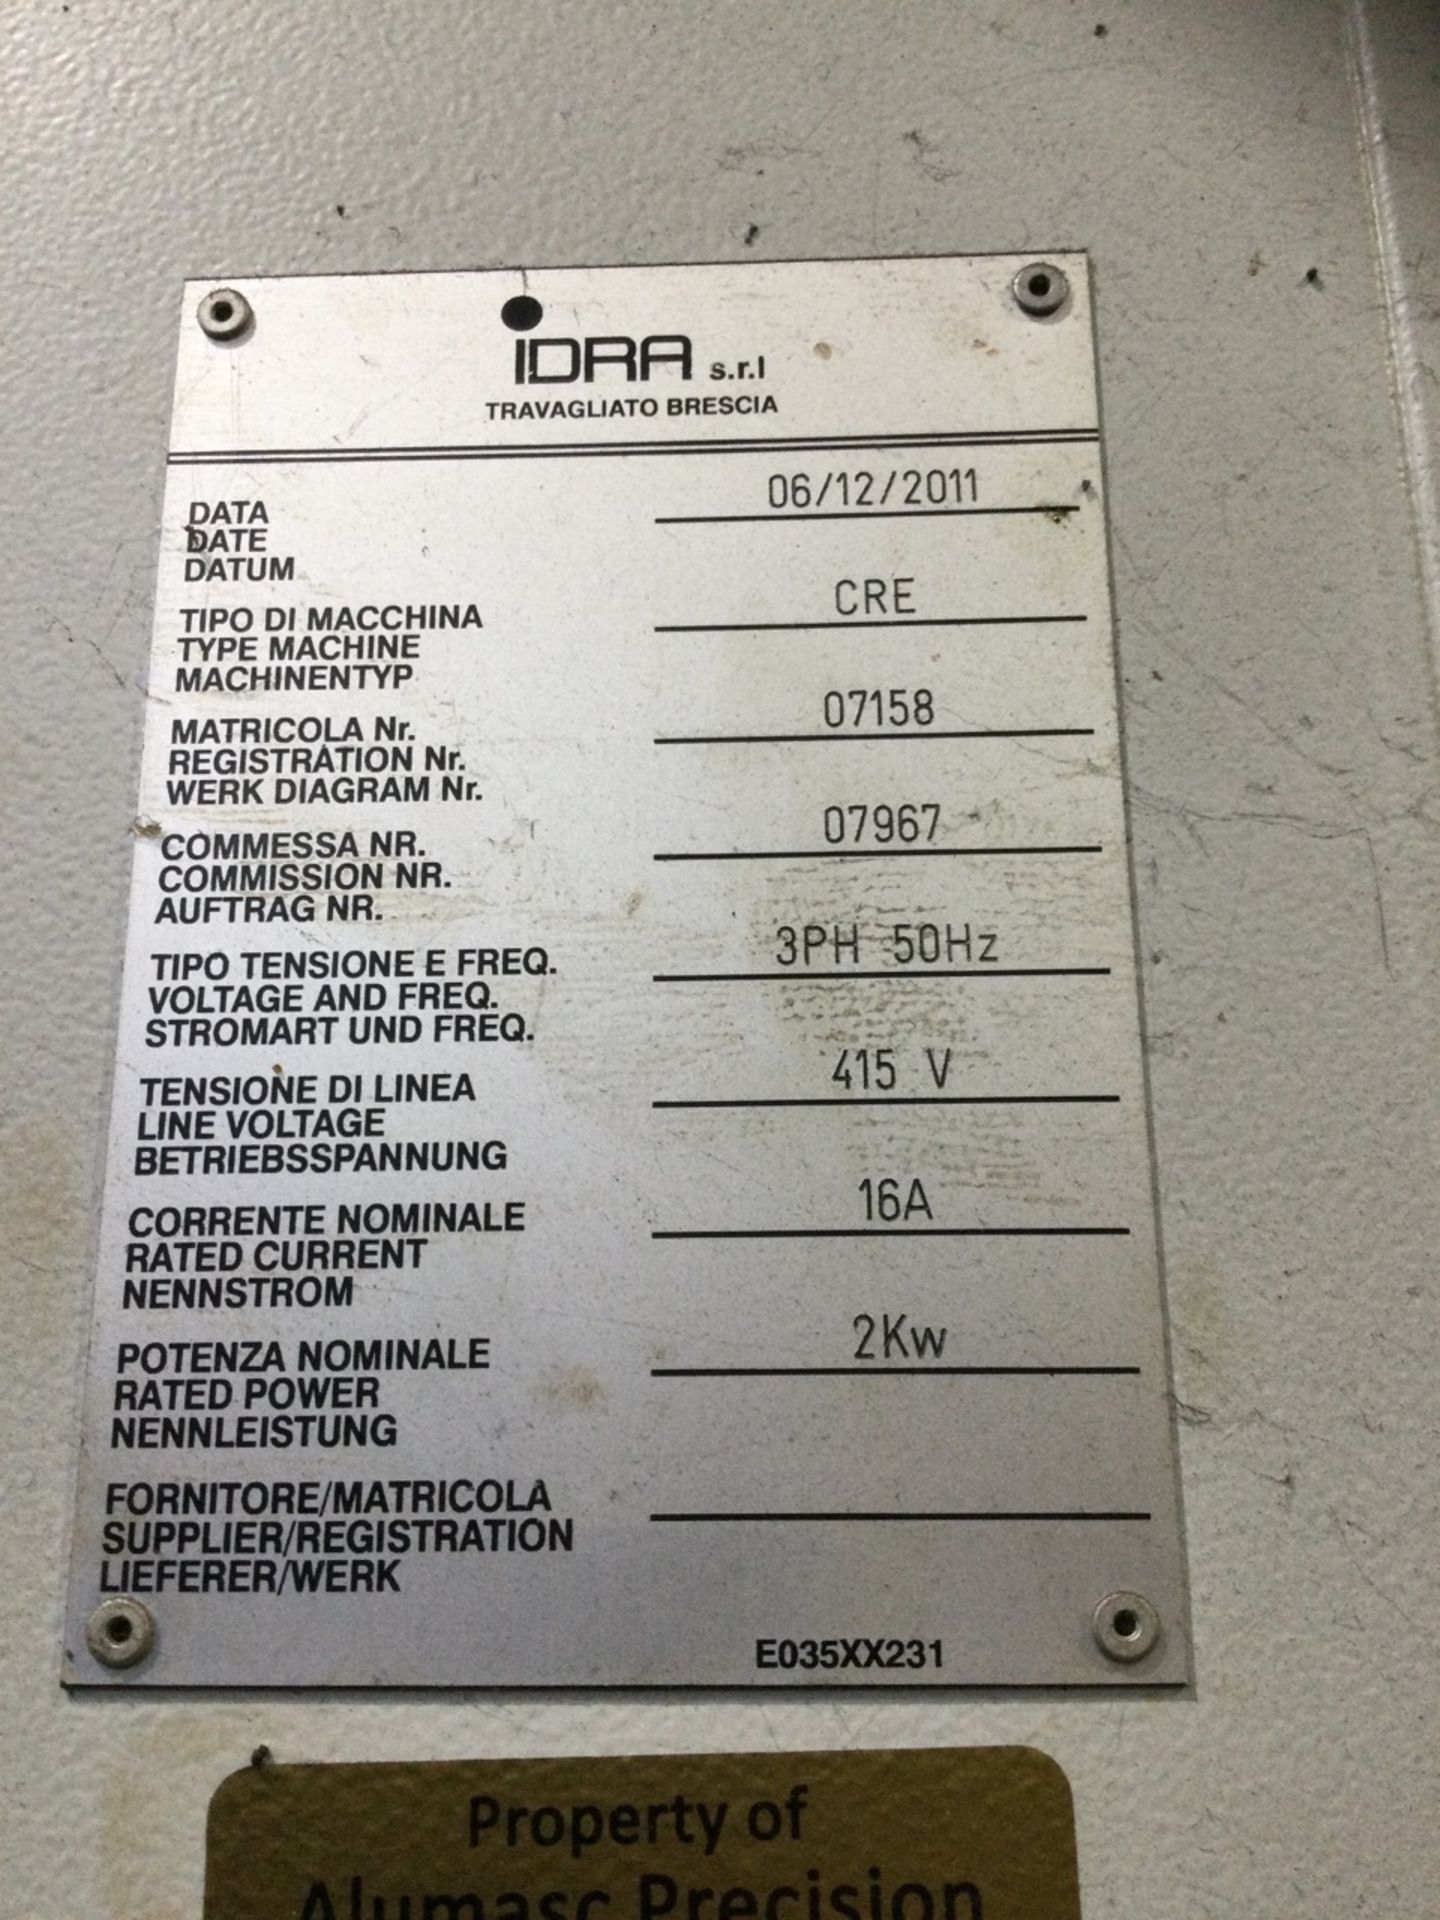 1 Idra, CRE, Robot Ladle, Serial Number: 7158, Yea - Image 4 of 4